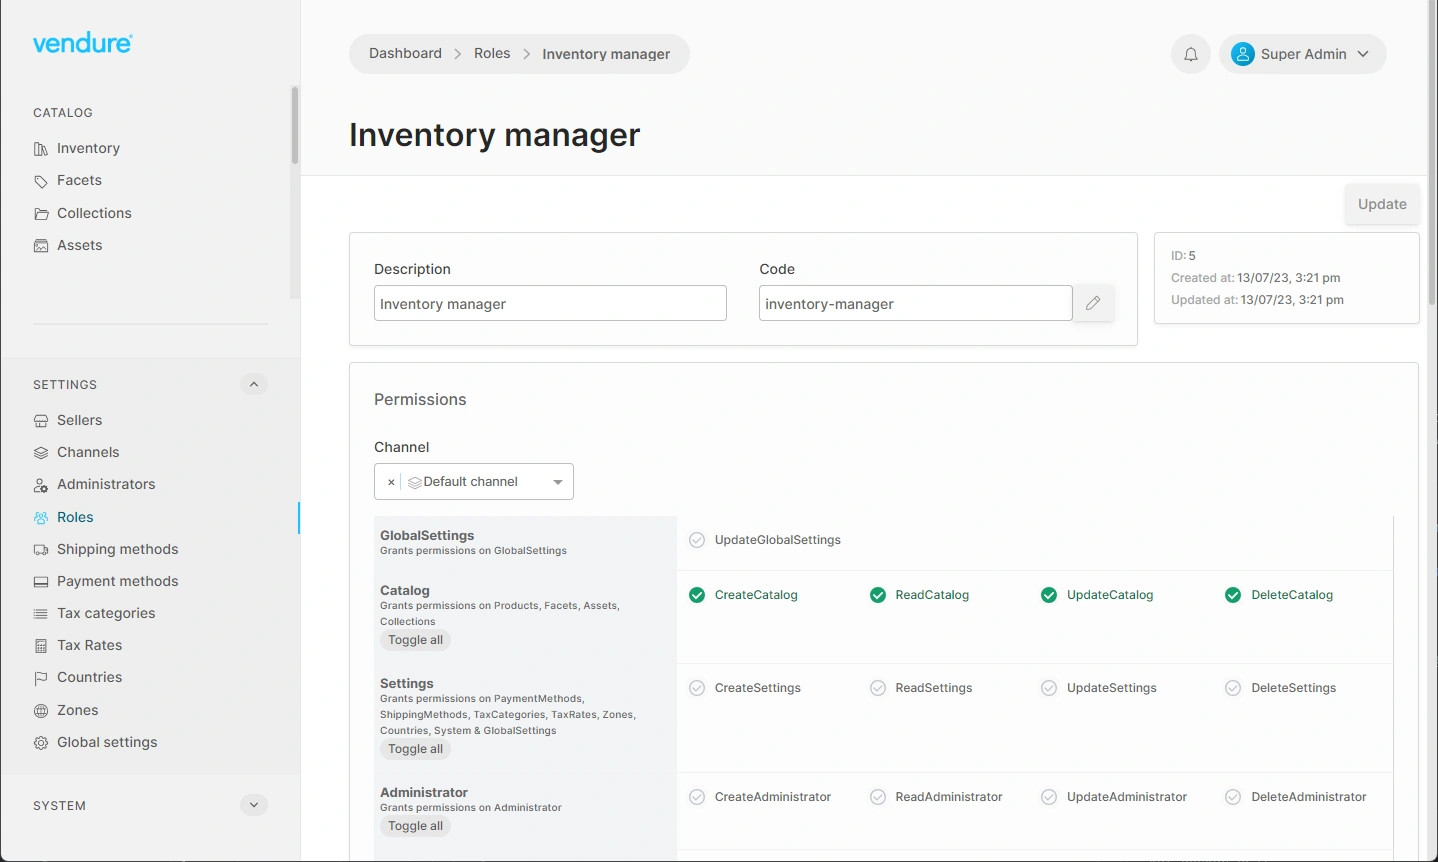 Inventory Manager role